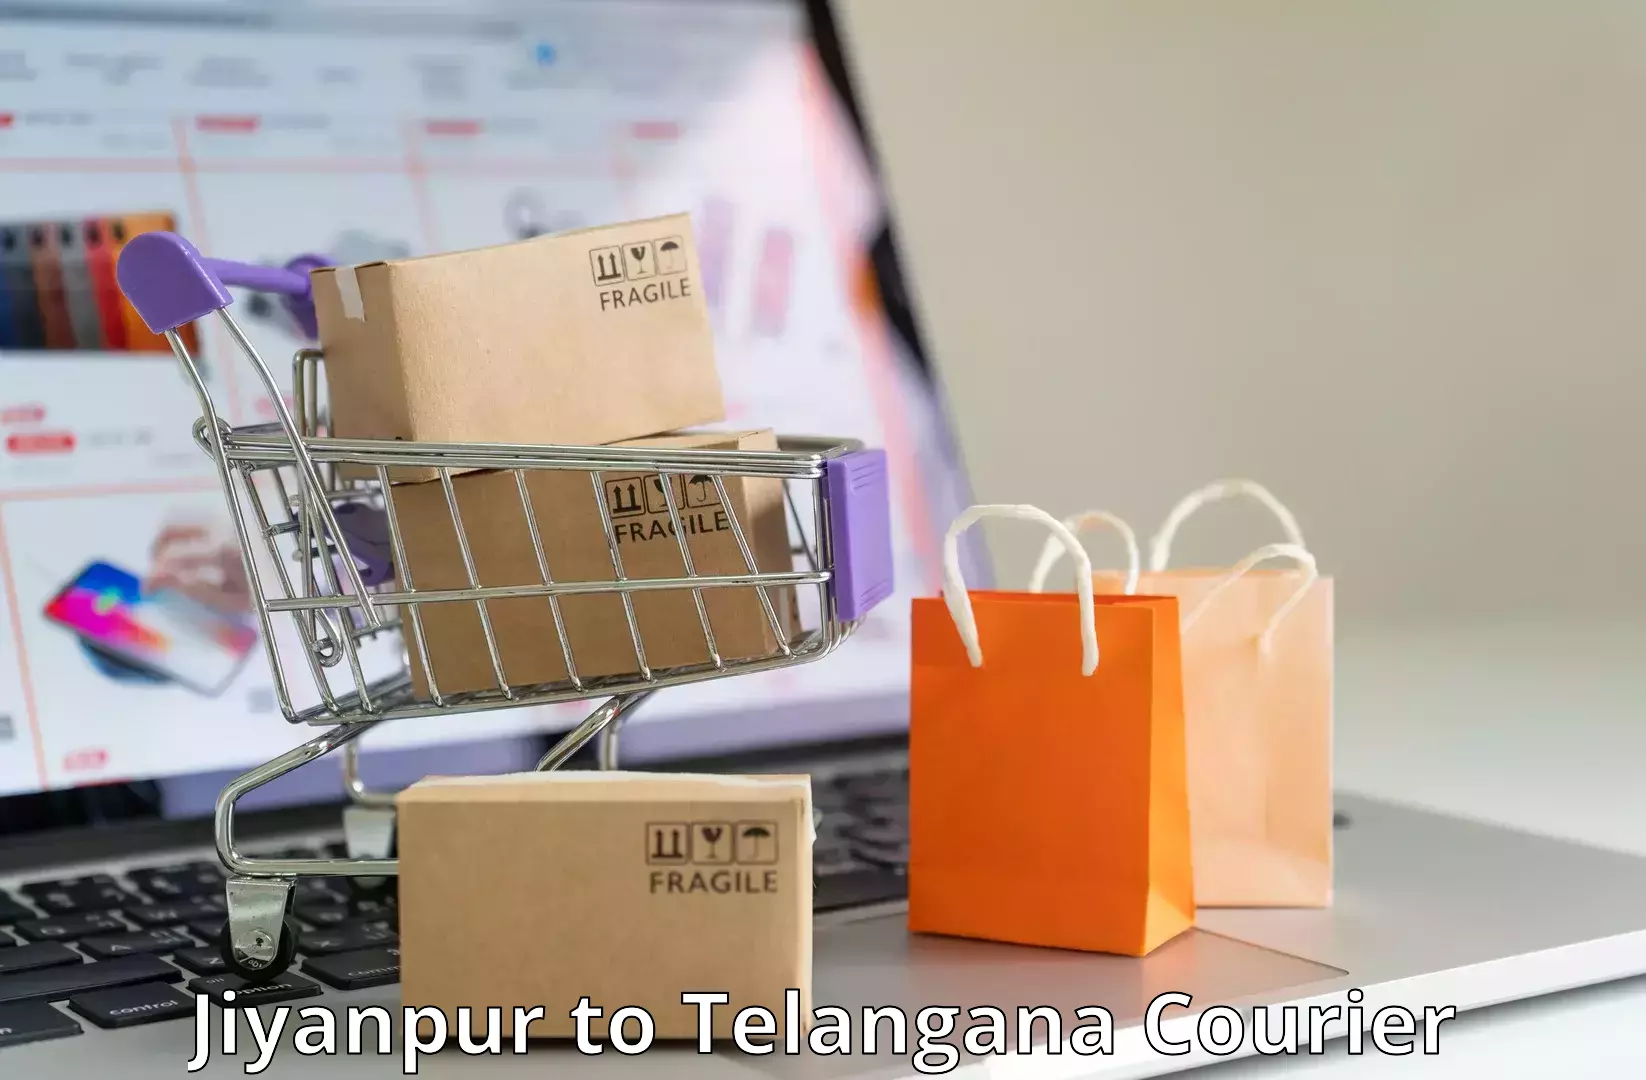 Courier service booking in Jiyanpur to Siddipet